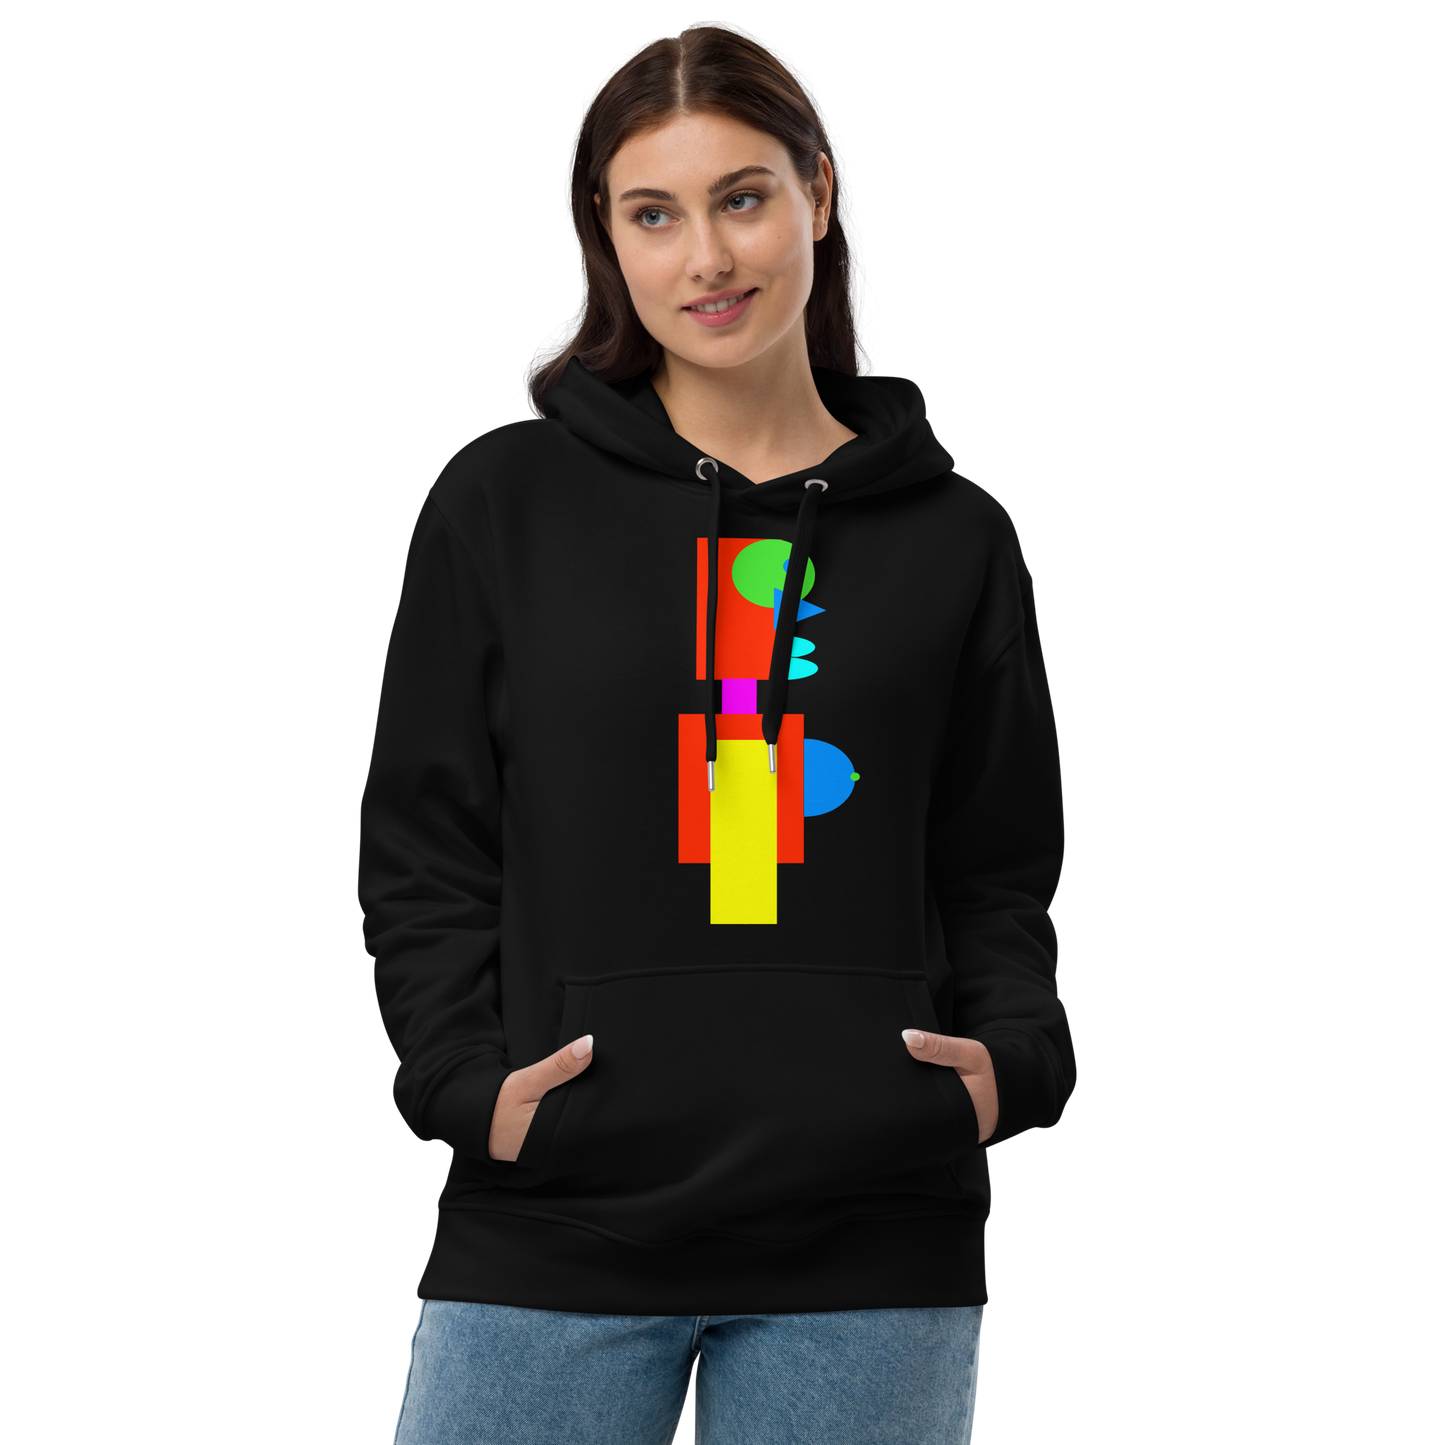 Unisex Hoodie Red-Line No.027 "1 of 5K" by MioLeo